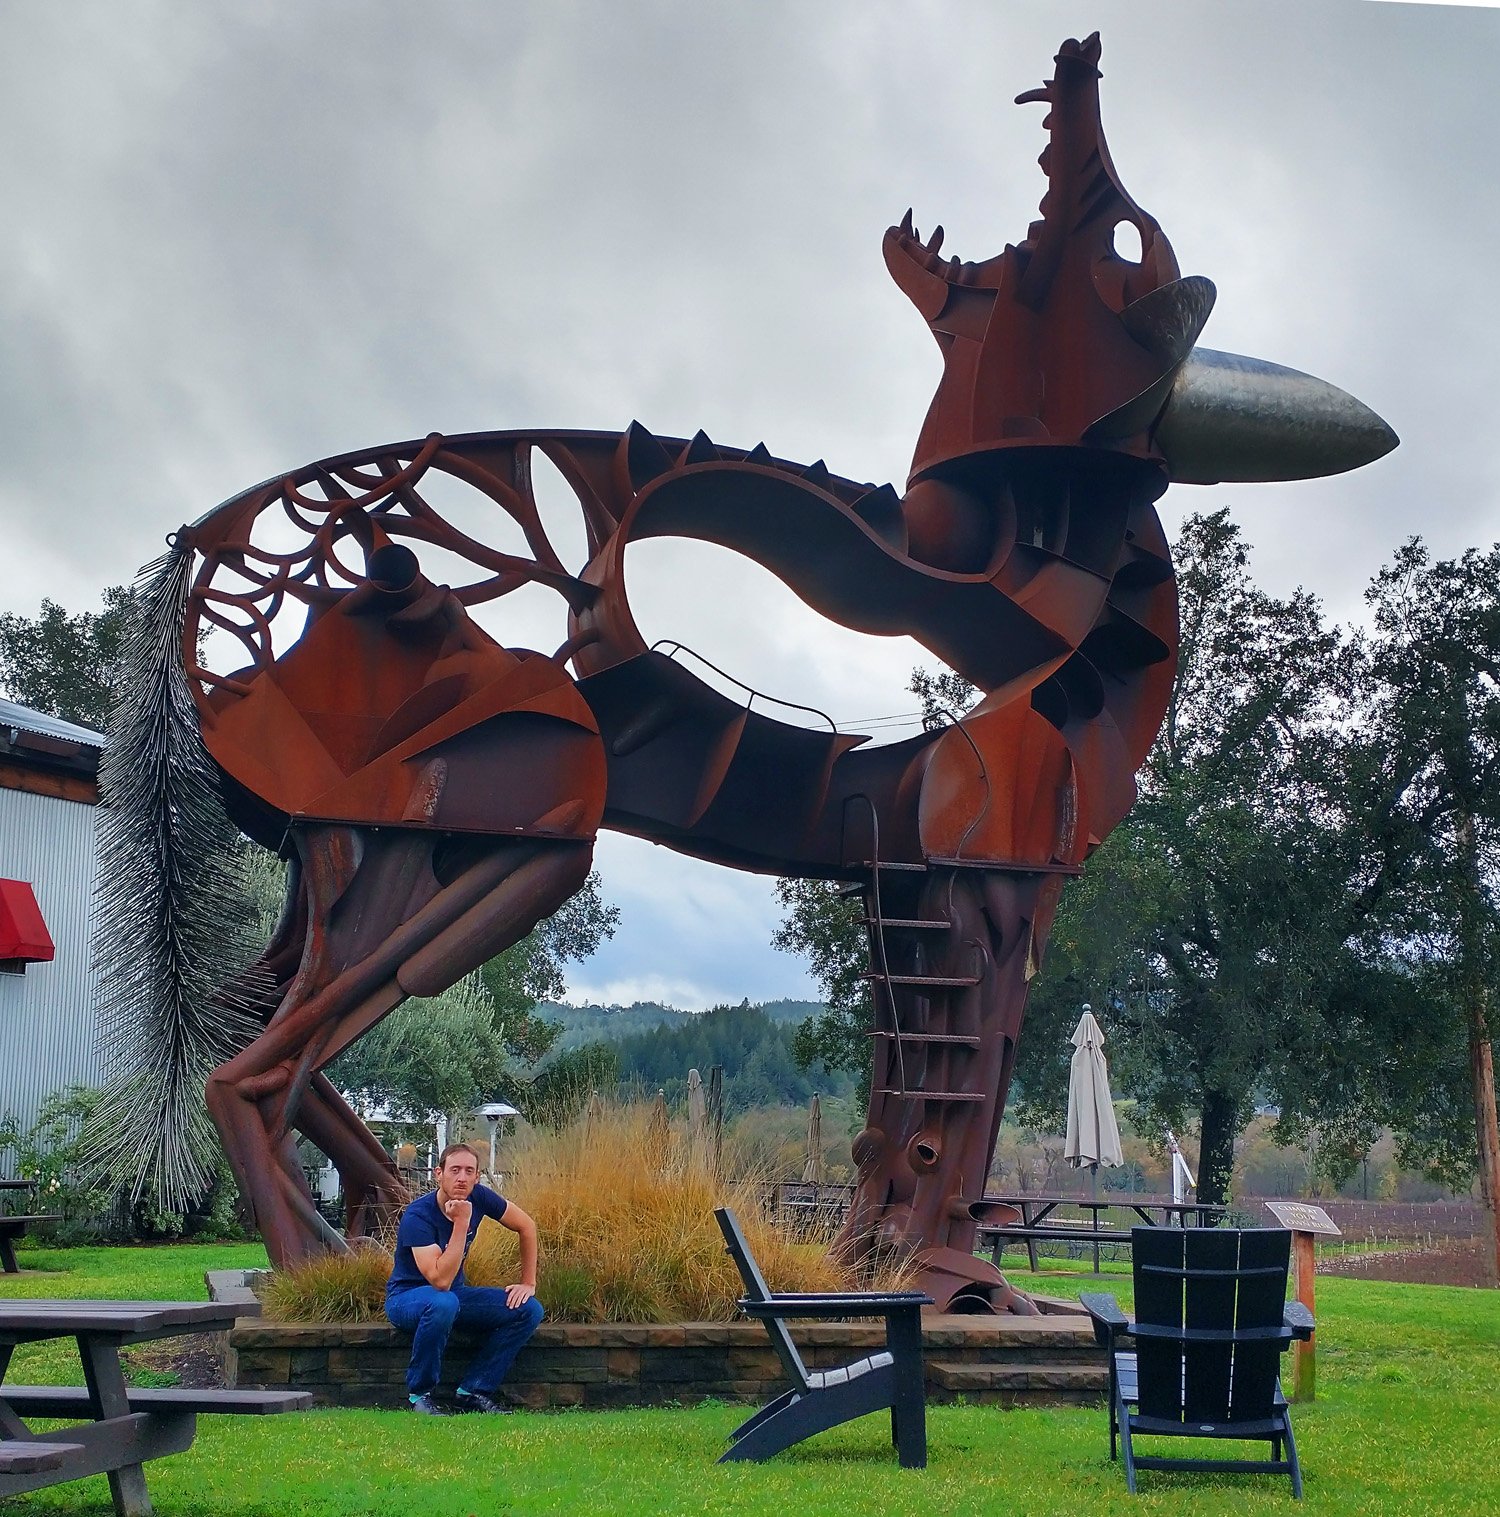 Huge Coyote sculpture at a winery in that city.